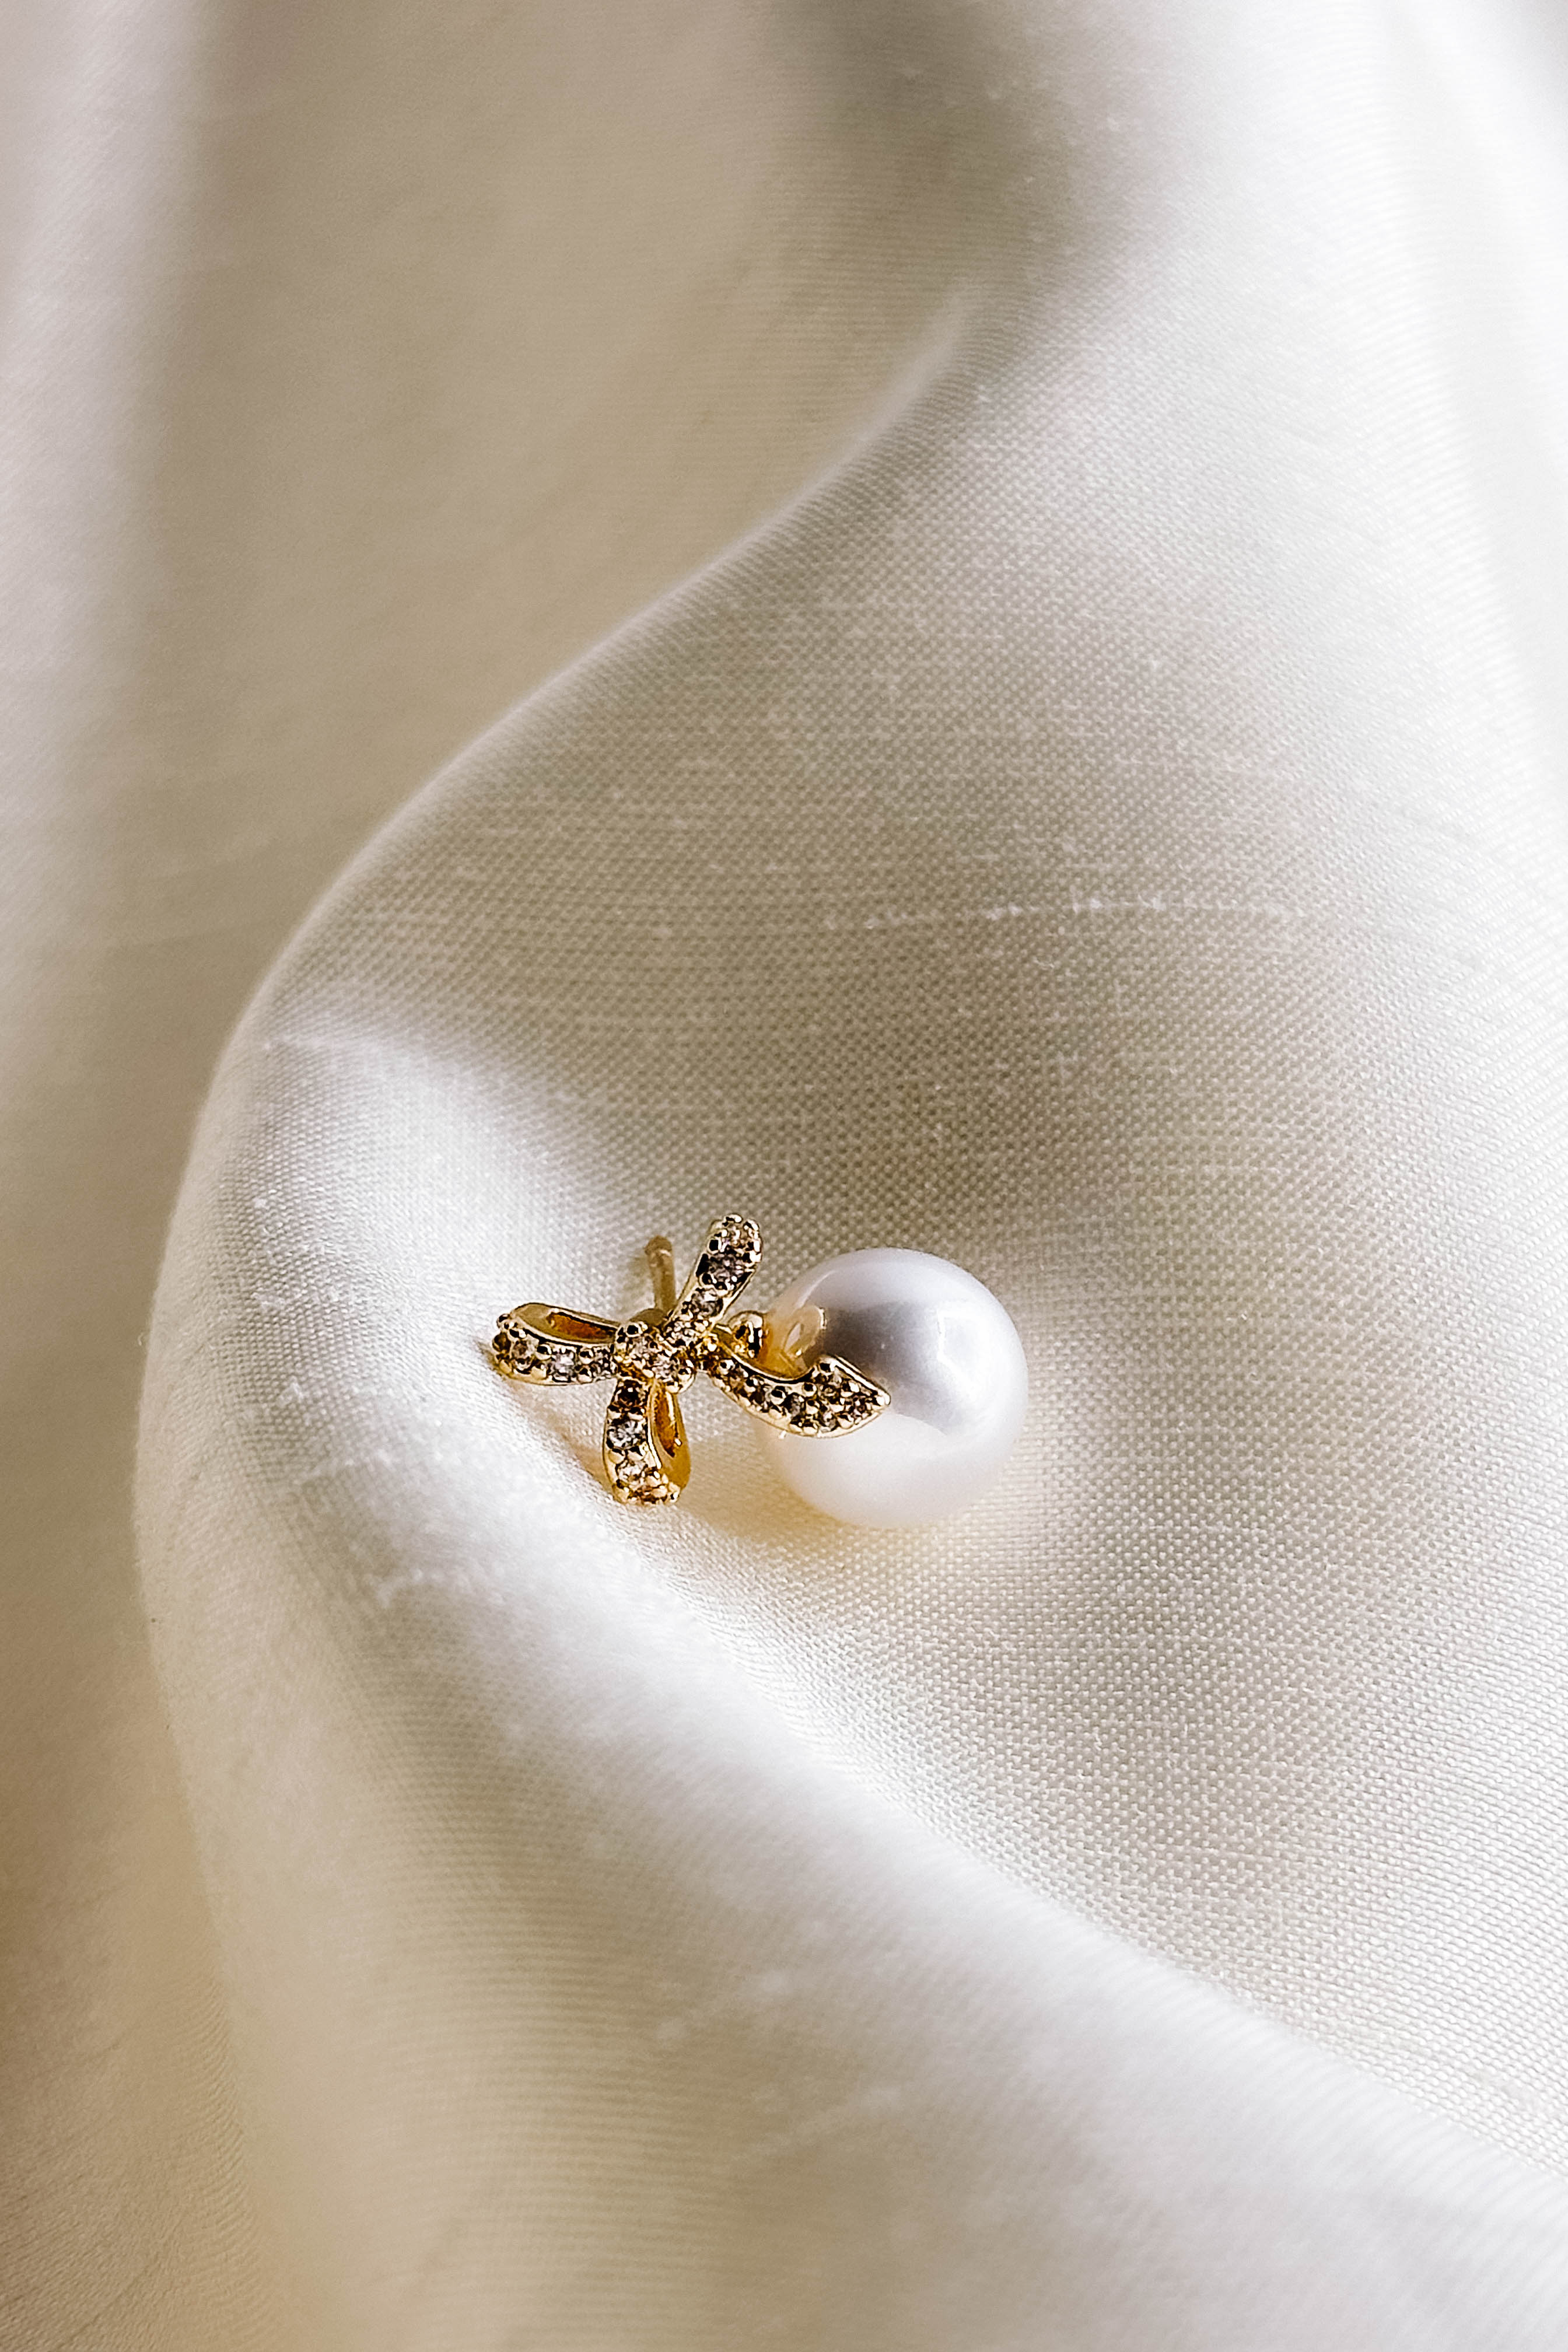 Flat lay close up view of pearl earring with gold and rhinestone bow